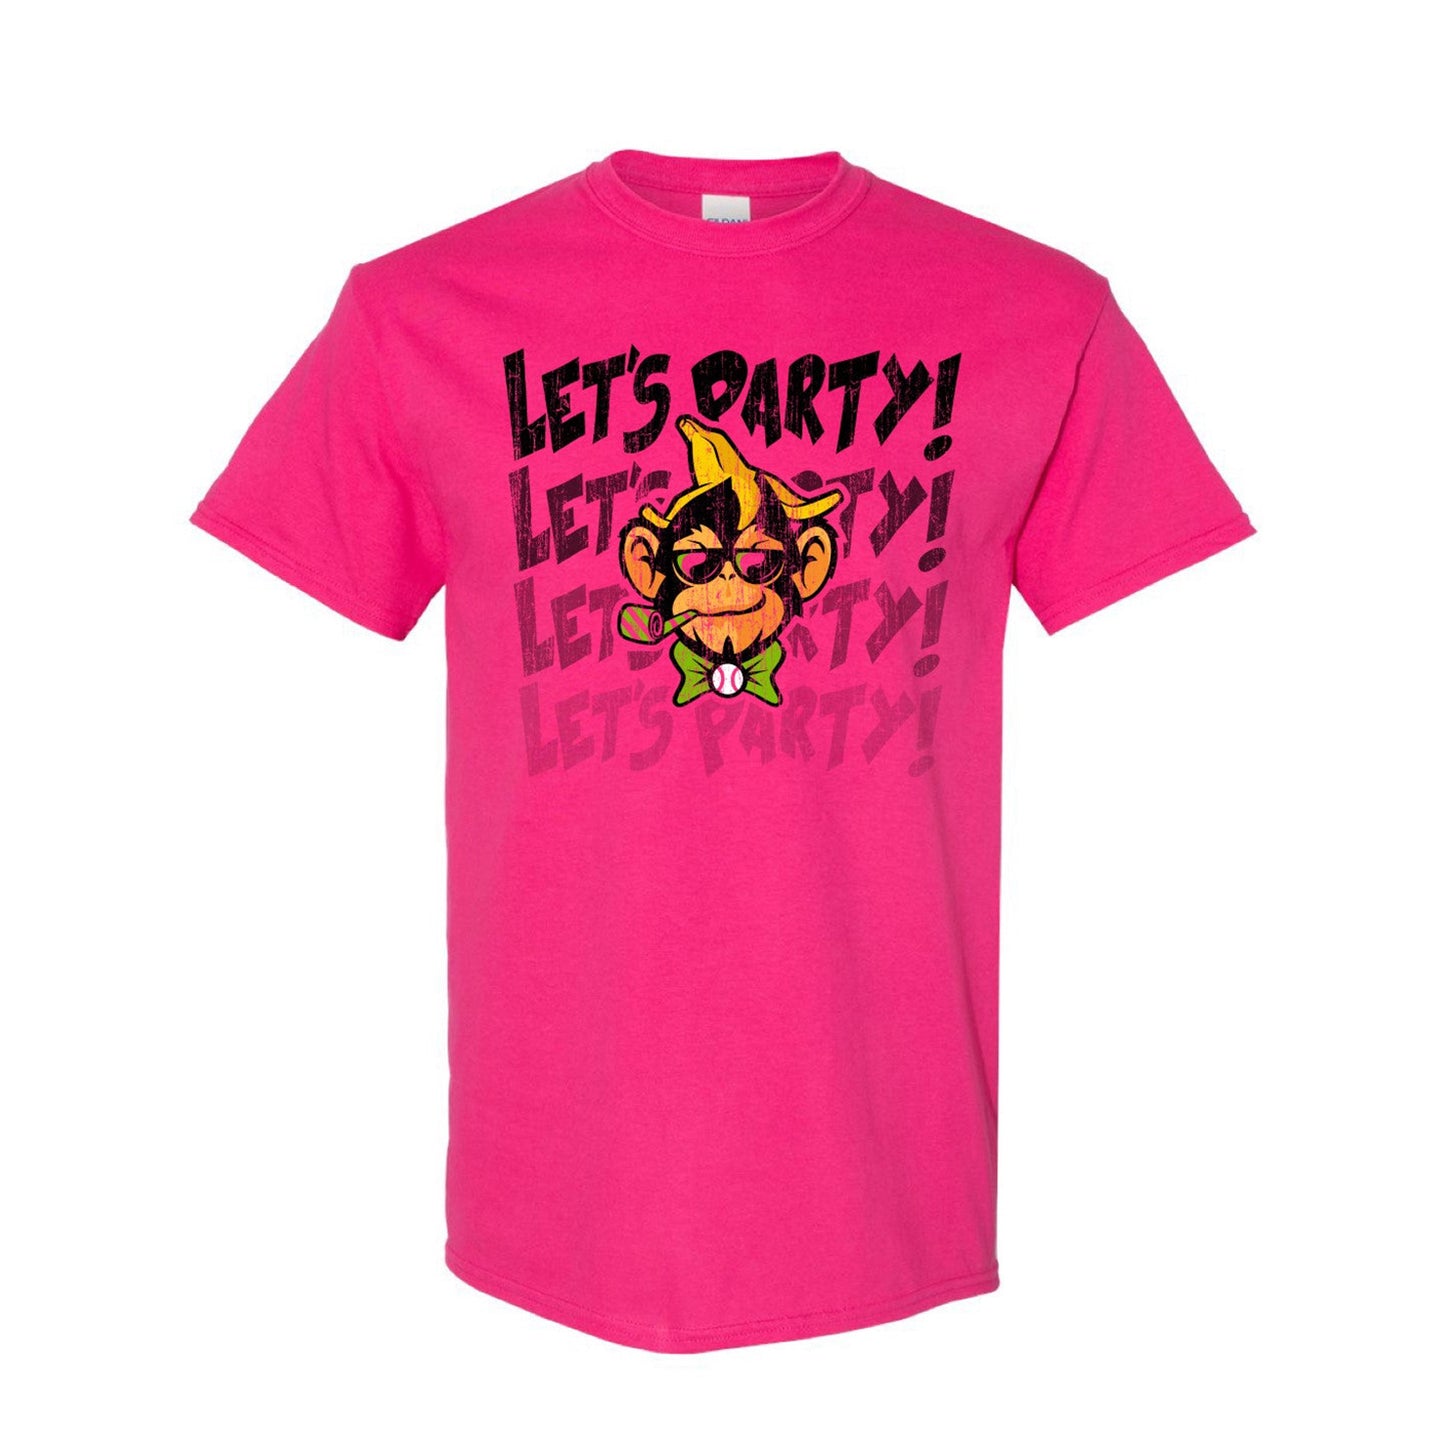 YOUTH Party Animals Short Sleeve Let's Party Tee - Pink